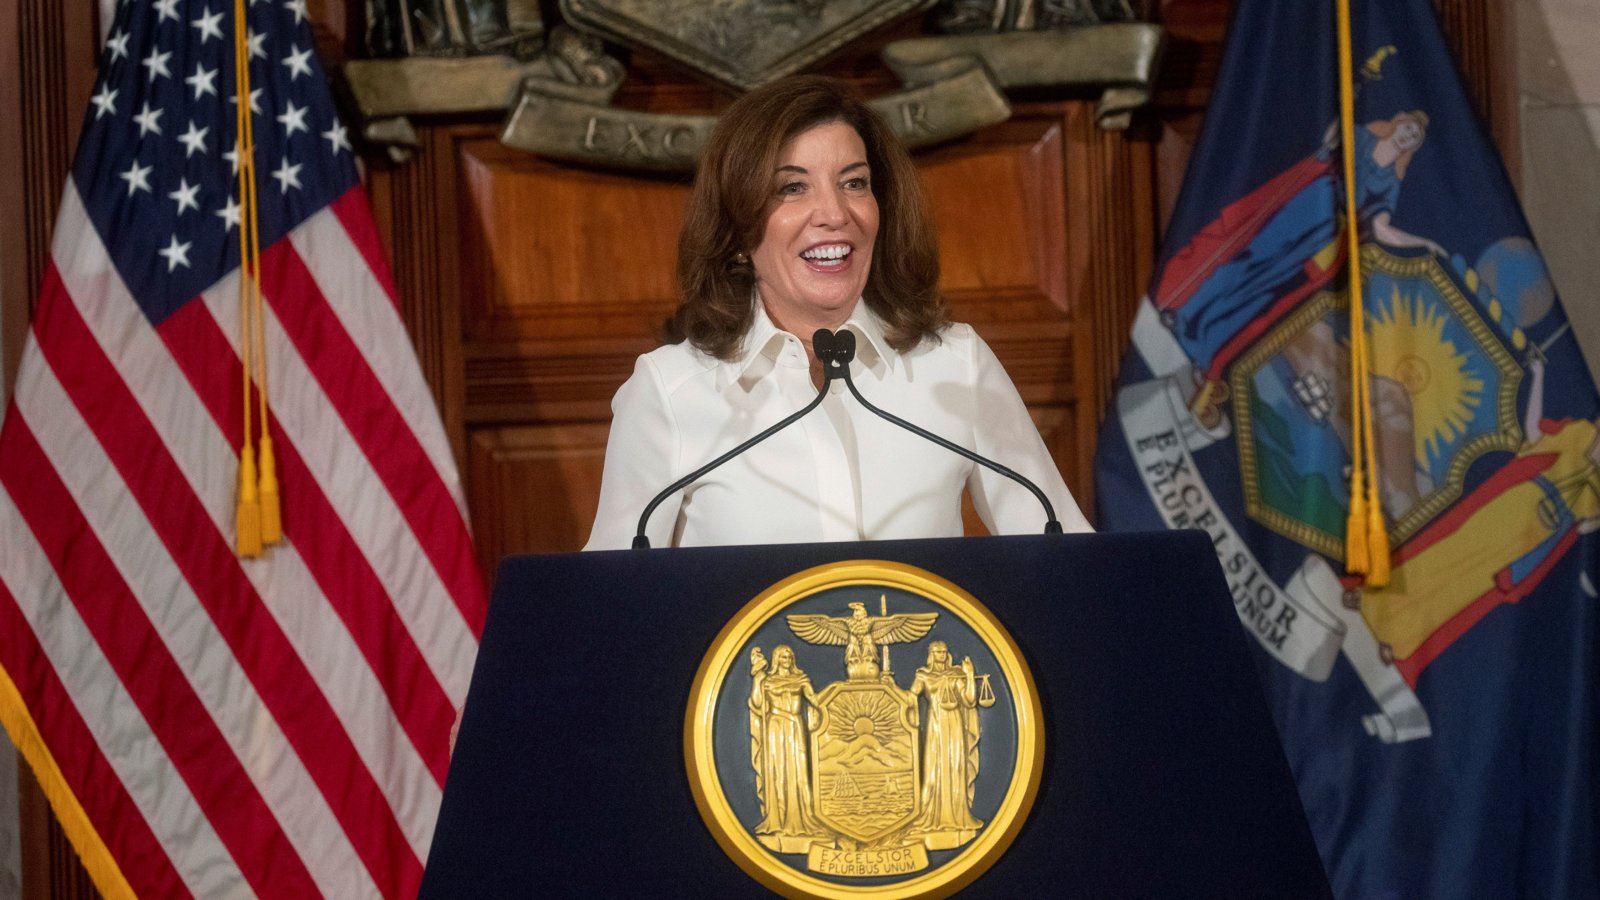 New York Governor Kathy Hochul reacts as she speaks to the media after taking part in a swearing-in ceremony to become New York State's 57th and first woman governor, in the Red Room at the New York State Capitol, in Albany, New York, U.S., August 24, 2021